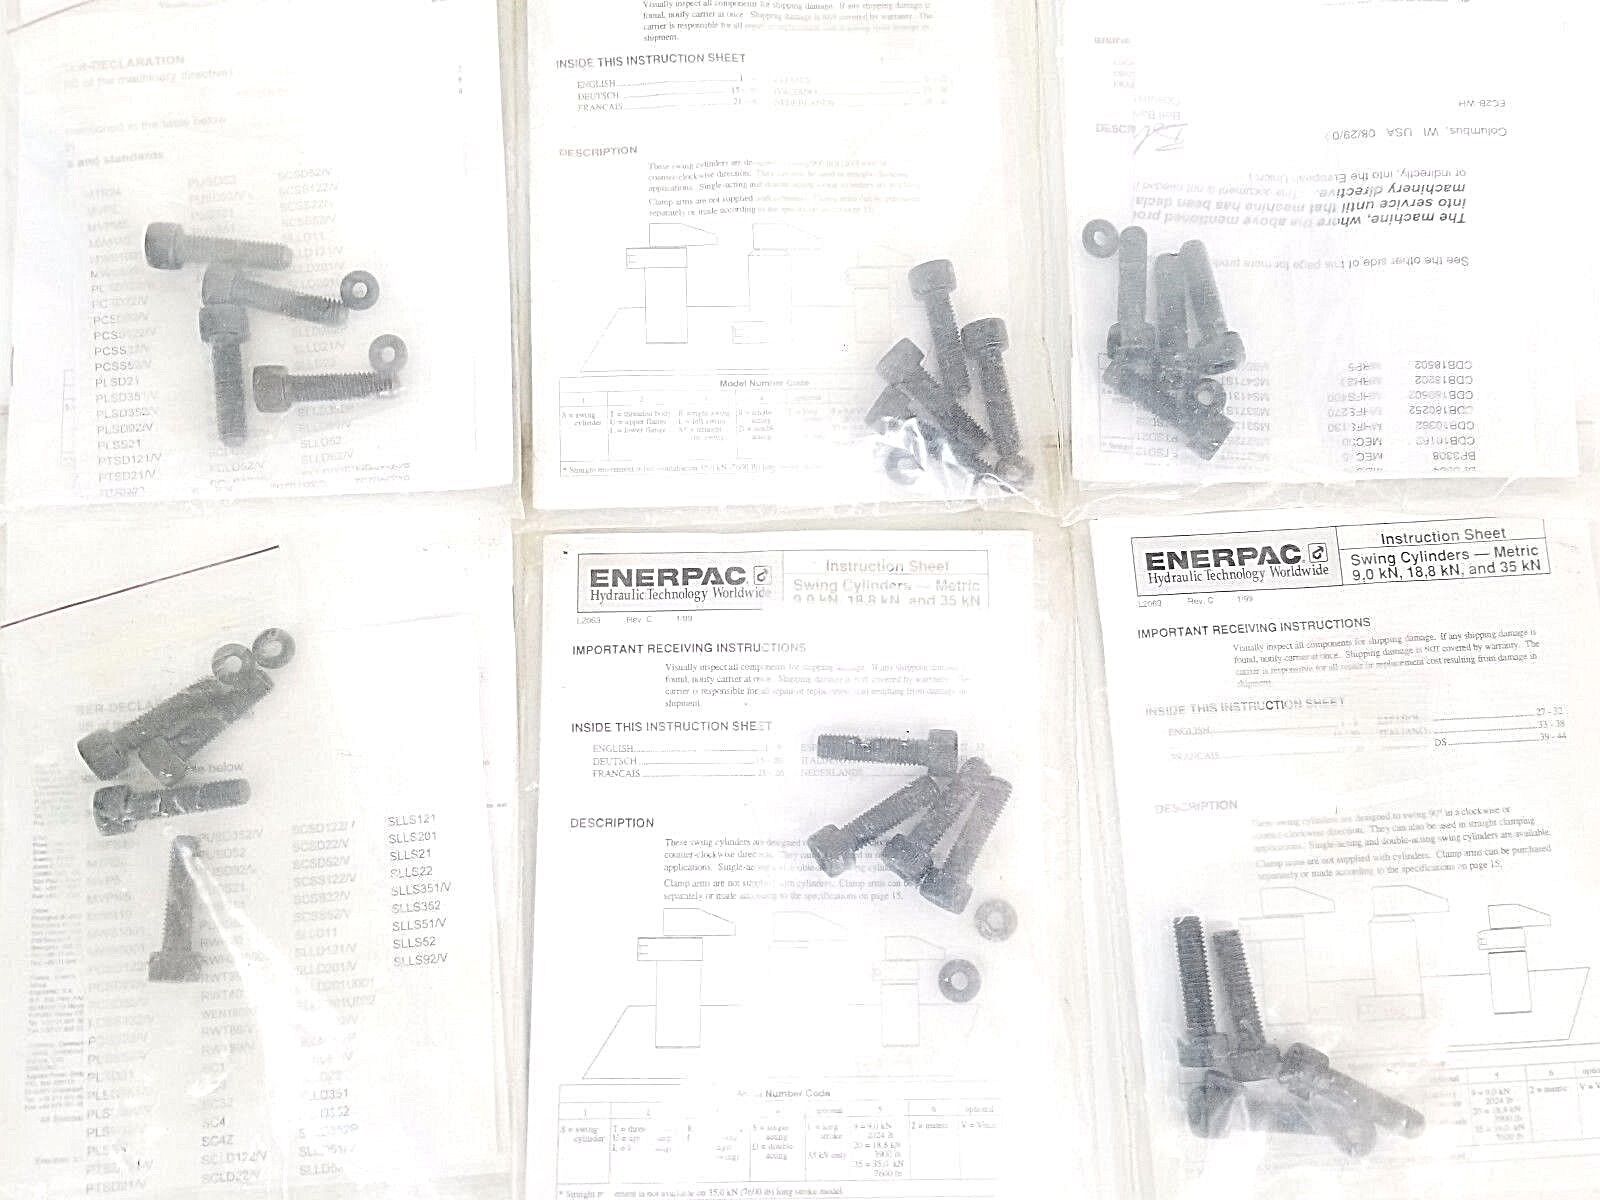 LOT OF 6 NEW ENERPAC INSTRUCTION SHEET SWING CYLINDERS METRIC HARDWARE KITS